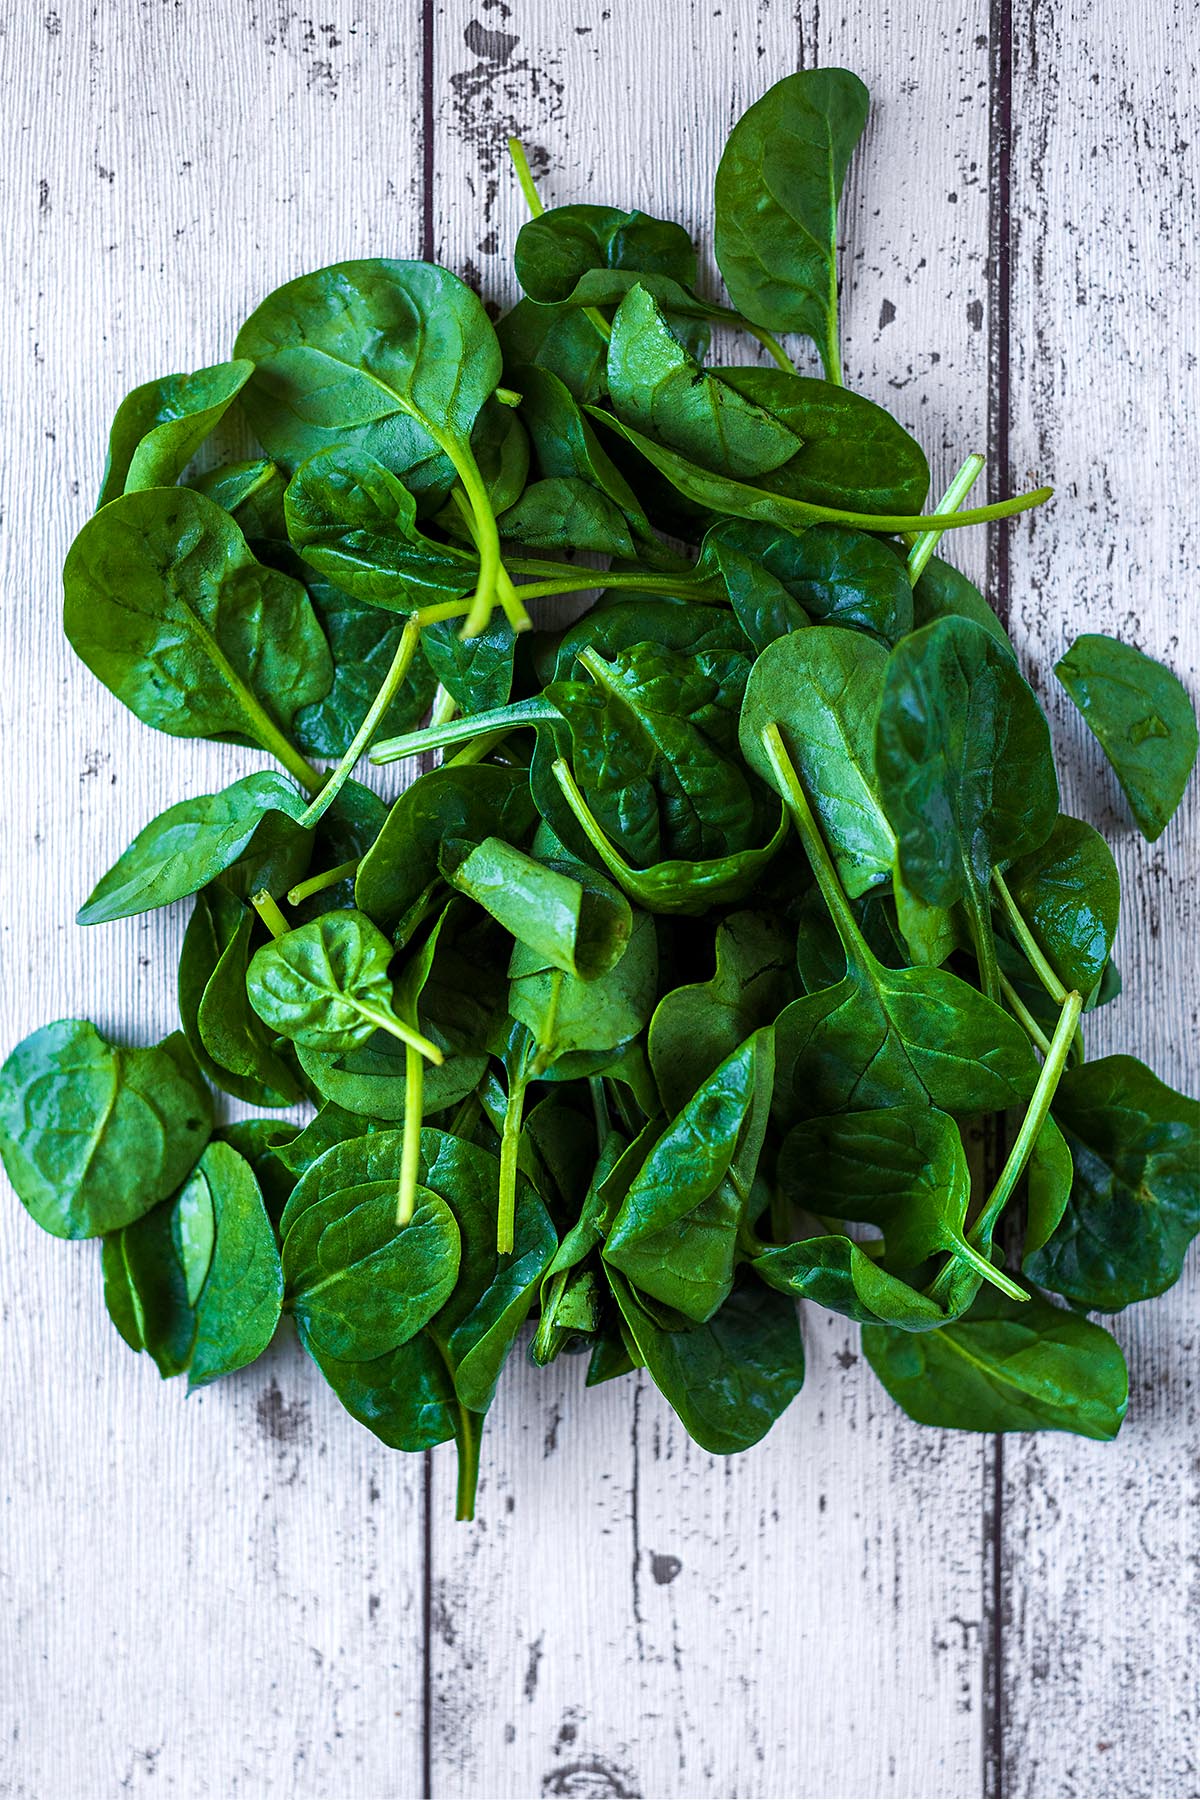 A large pile of spinach leaves on a wooden surface.